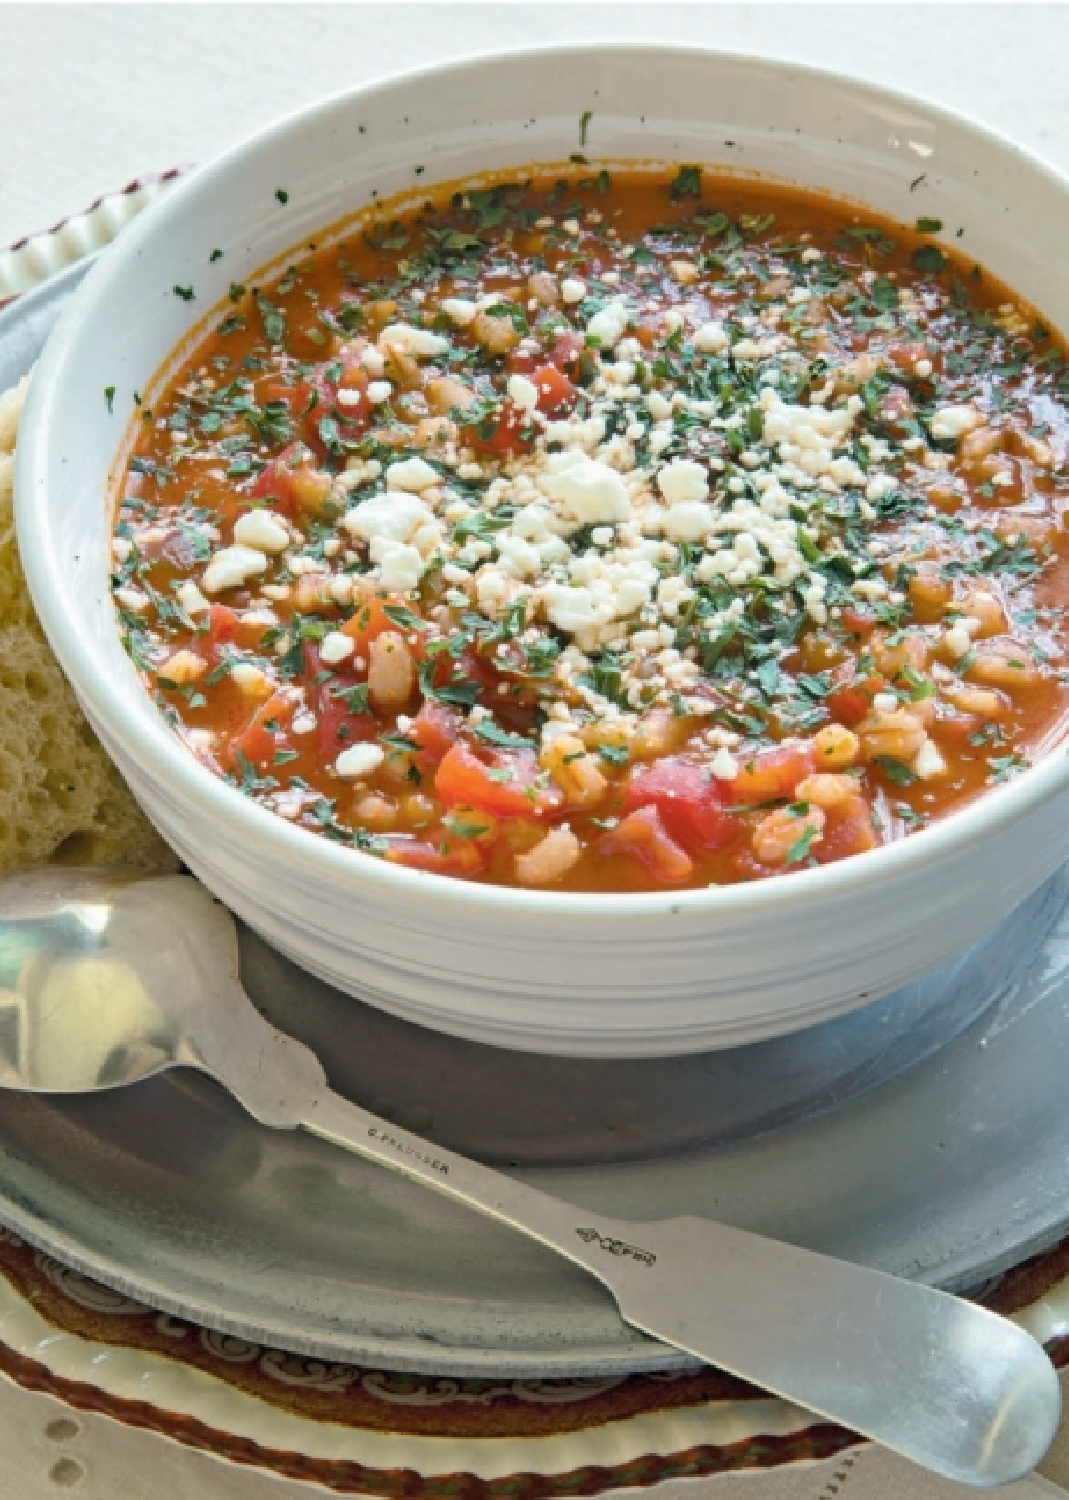 Delicious bowl of tomato soup in THE ART OF PANTRY COOKING by Ronda Carman (Rizzoli, 2022).